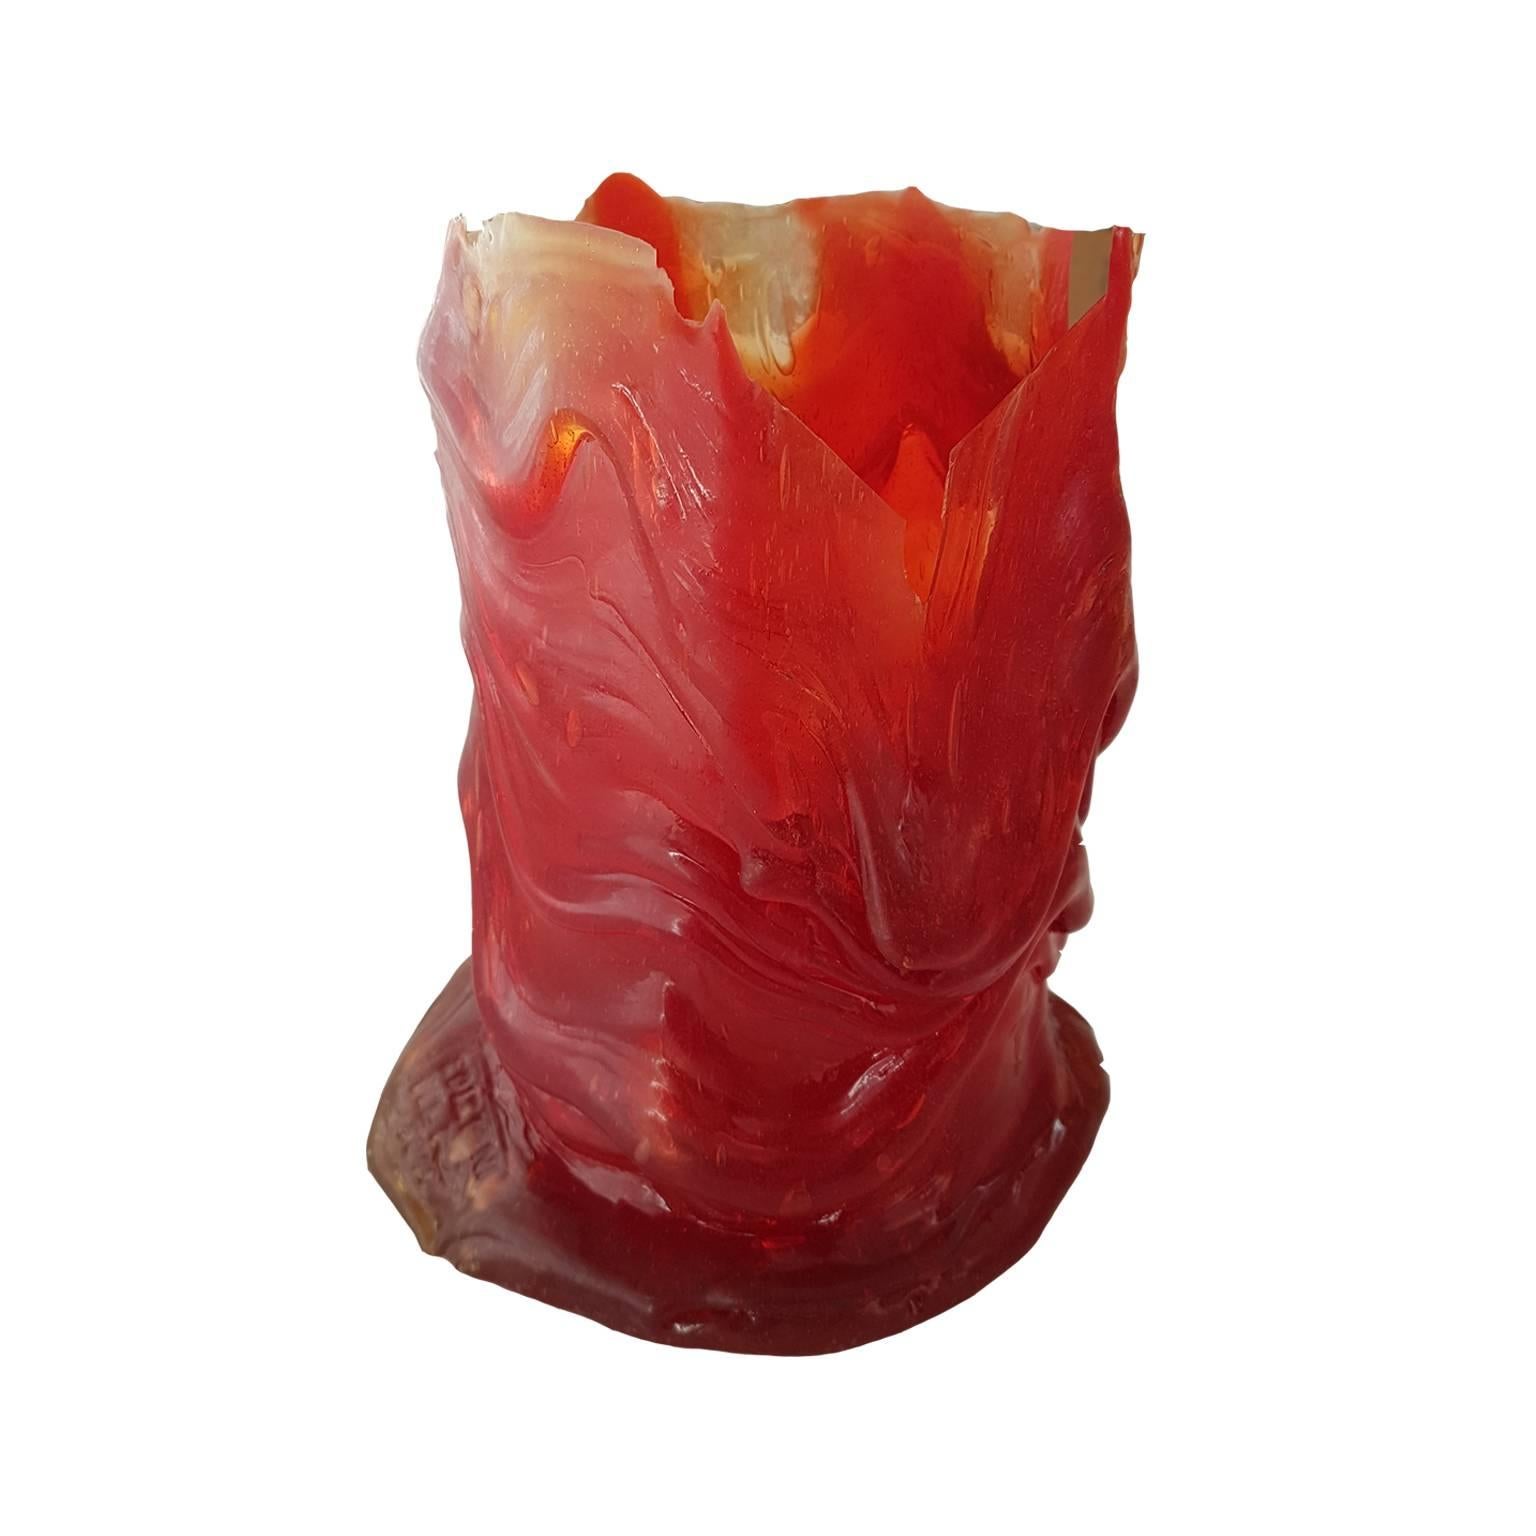 This red basket made in resin is part of 